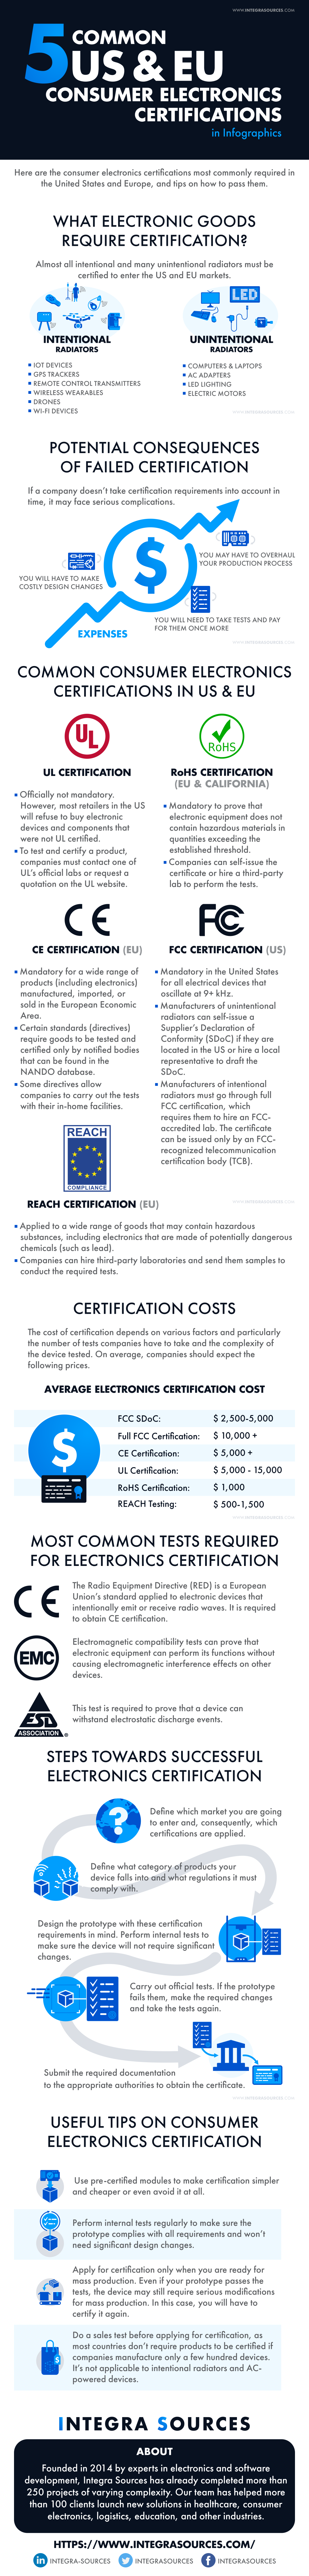 Here are the cunsomer electronics certifications most commonly required in the Unated States and Europe, and tips on how to pass them in infographics